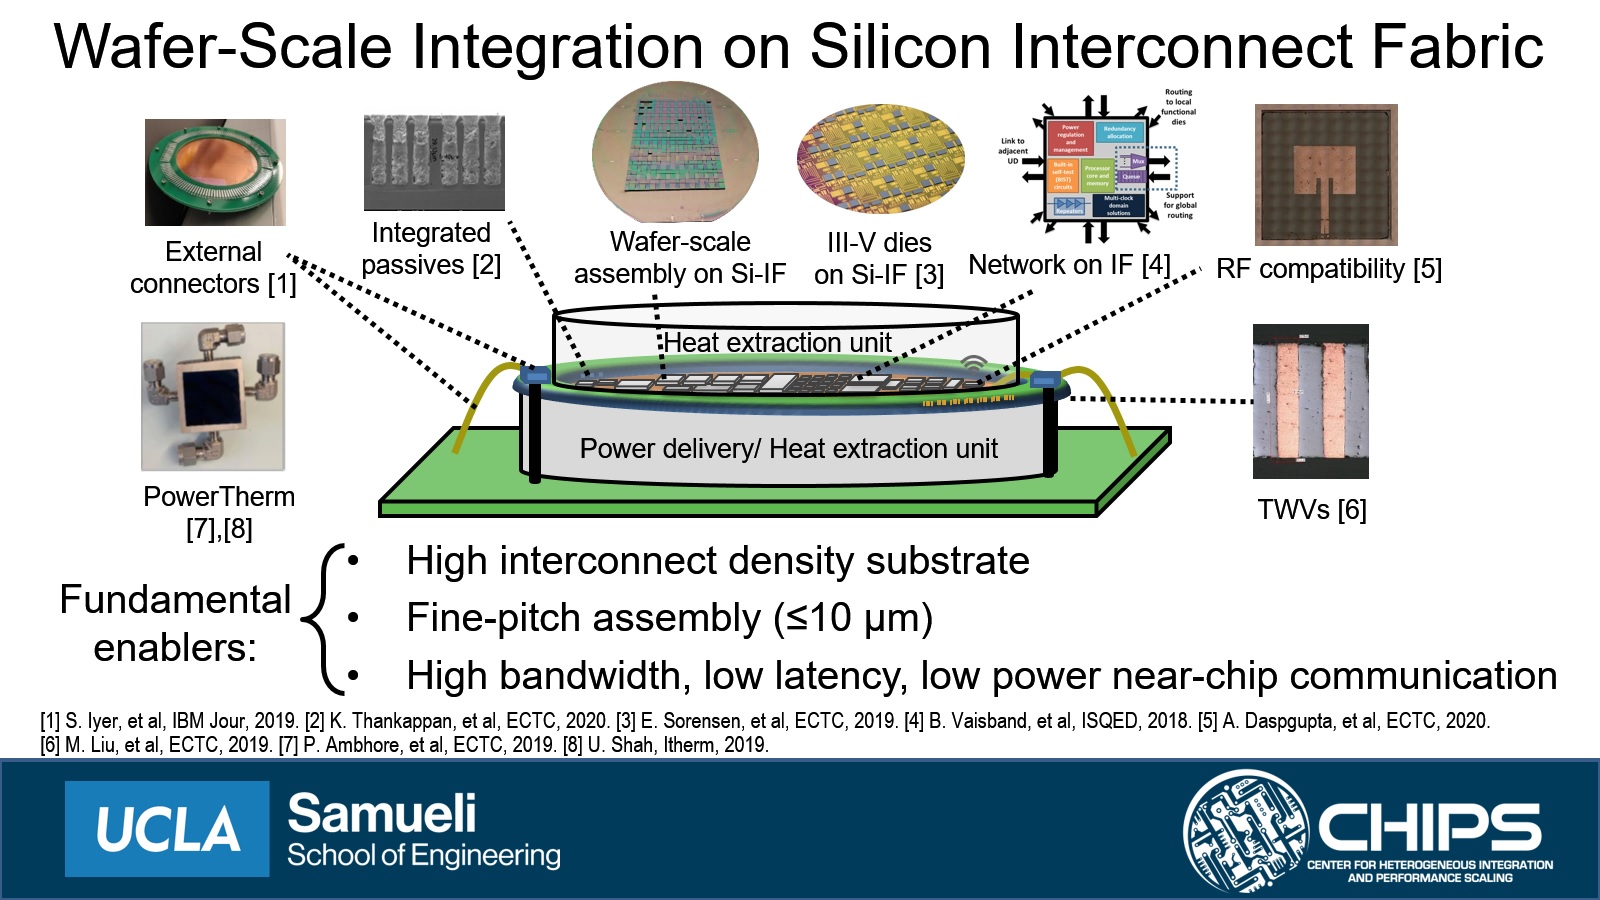 Demonstration of a Low Latency Fine-pitch Assembly on the Silicon Interconnect Fabric